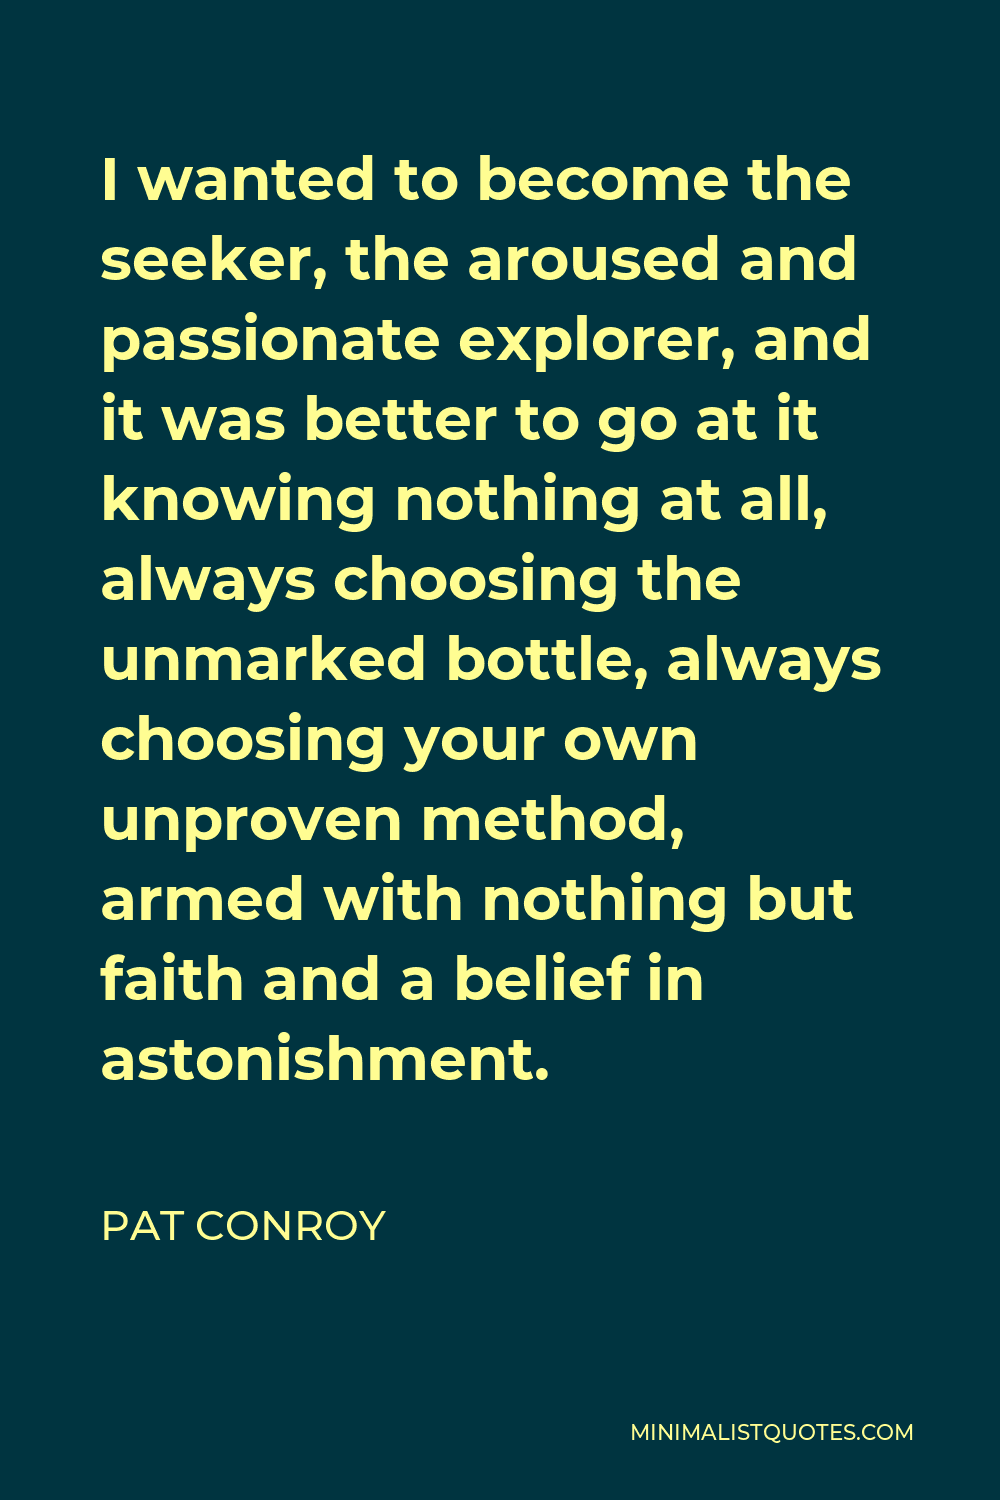 Pat Conroy Quote - I wanted to become the seeker, the aroused and passionate explorer, and it was better to go at it knowing nothing at all, always choosing the unmarked bottle, always choosing your own unproven method, armed with nothing but faith and a belief in astonishment.